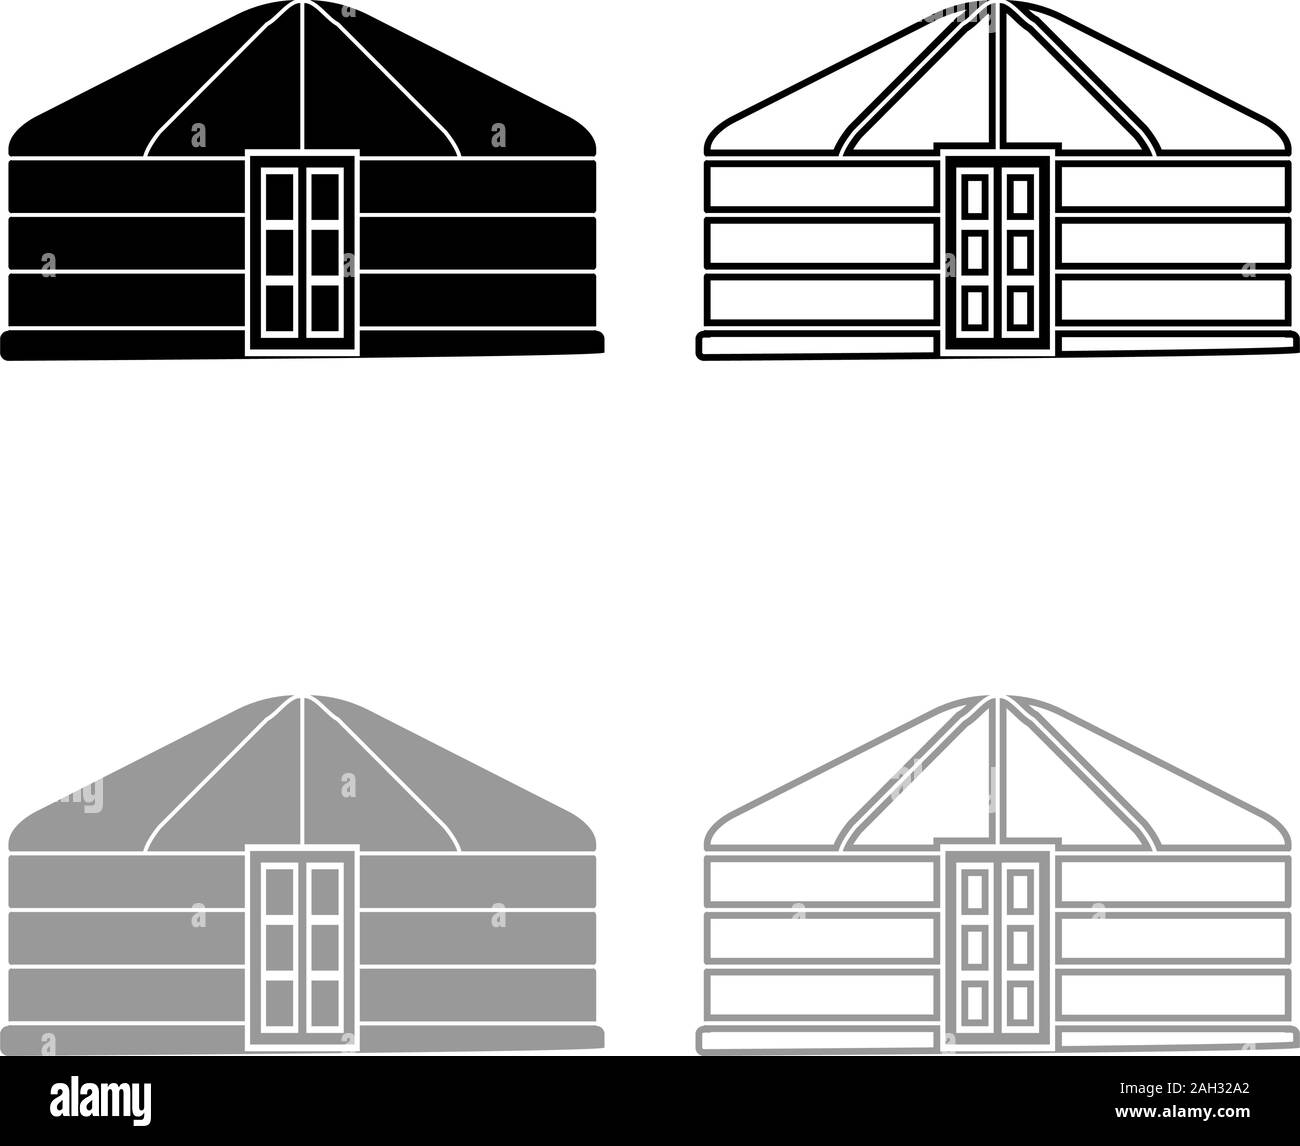 Yurt of nomads Portable frame dwelling with door Mongolian tent covering building icon outline set black grey color vector illustration flat style Stock Vector